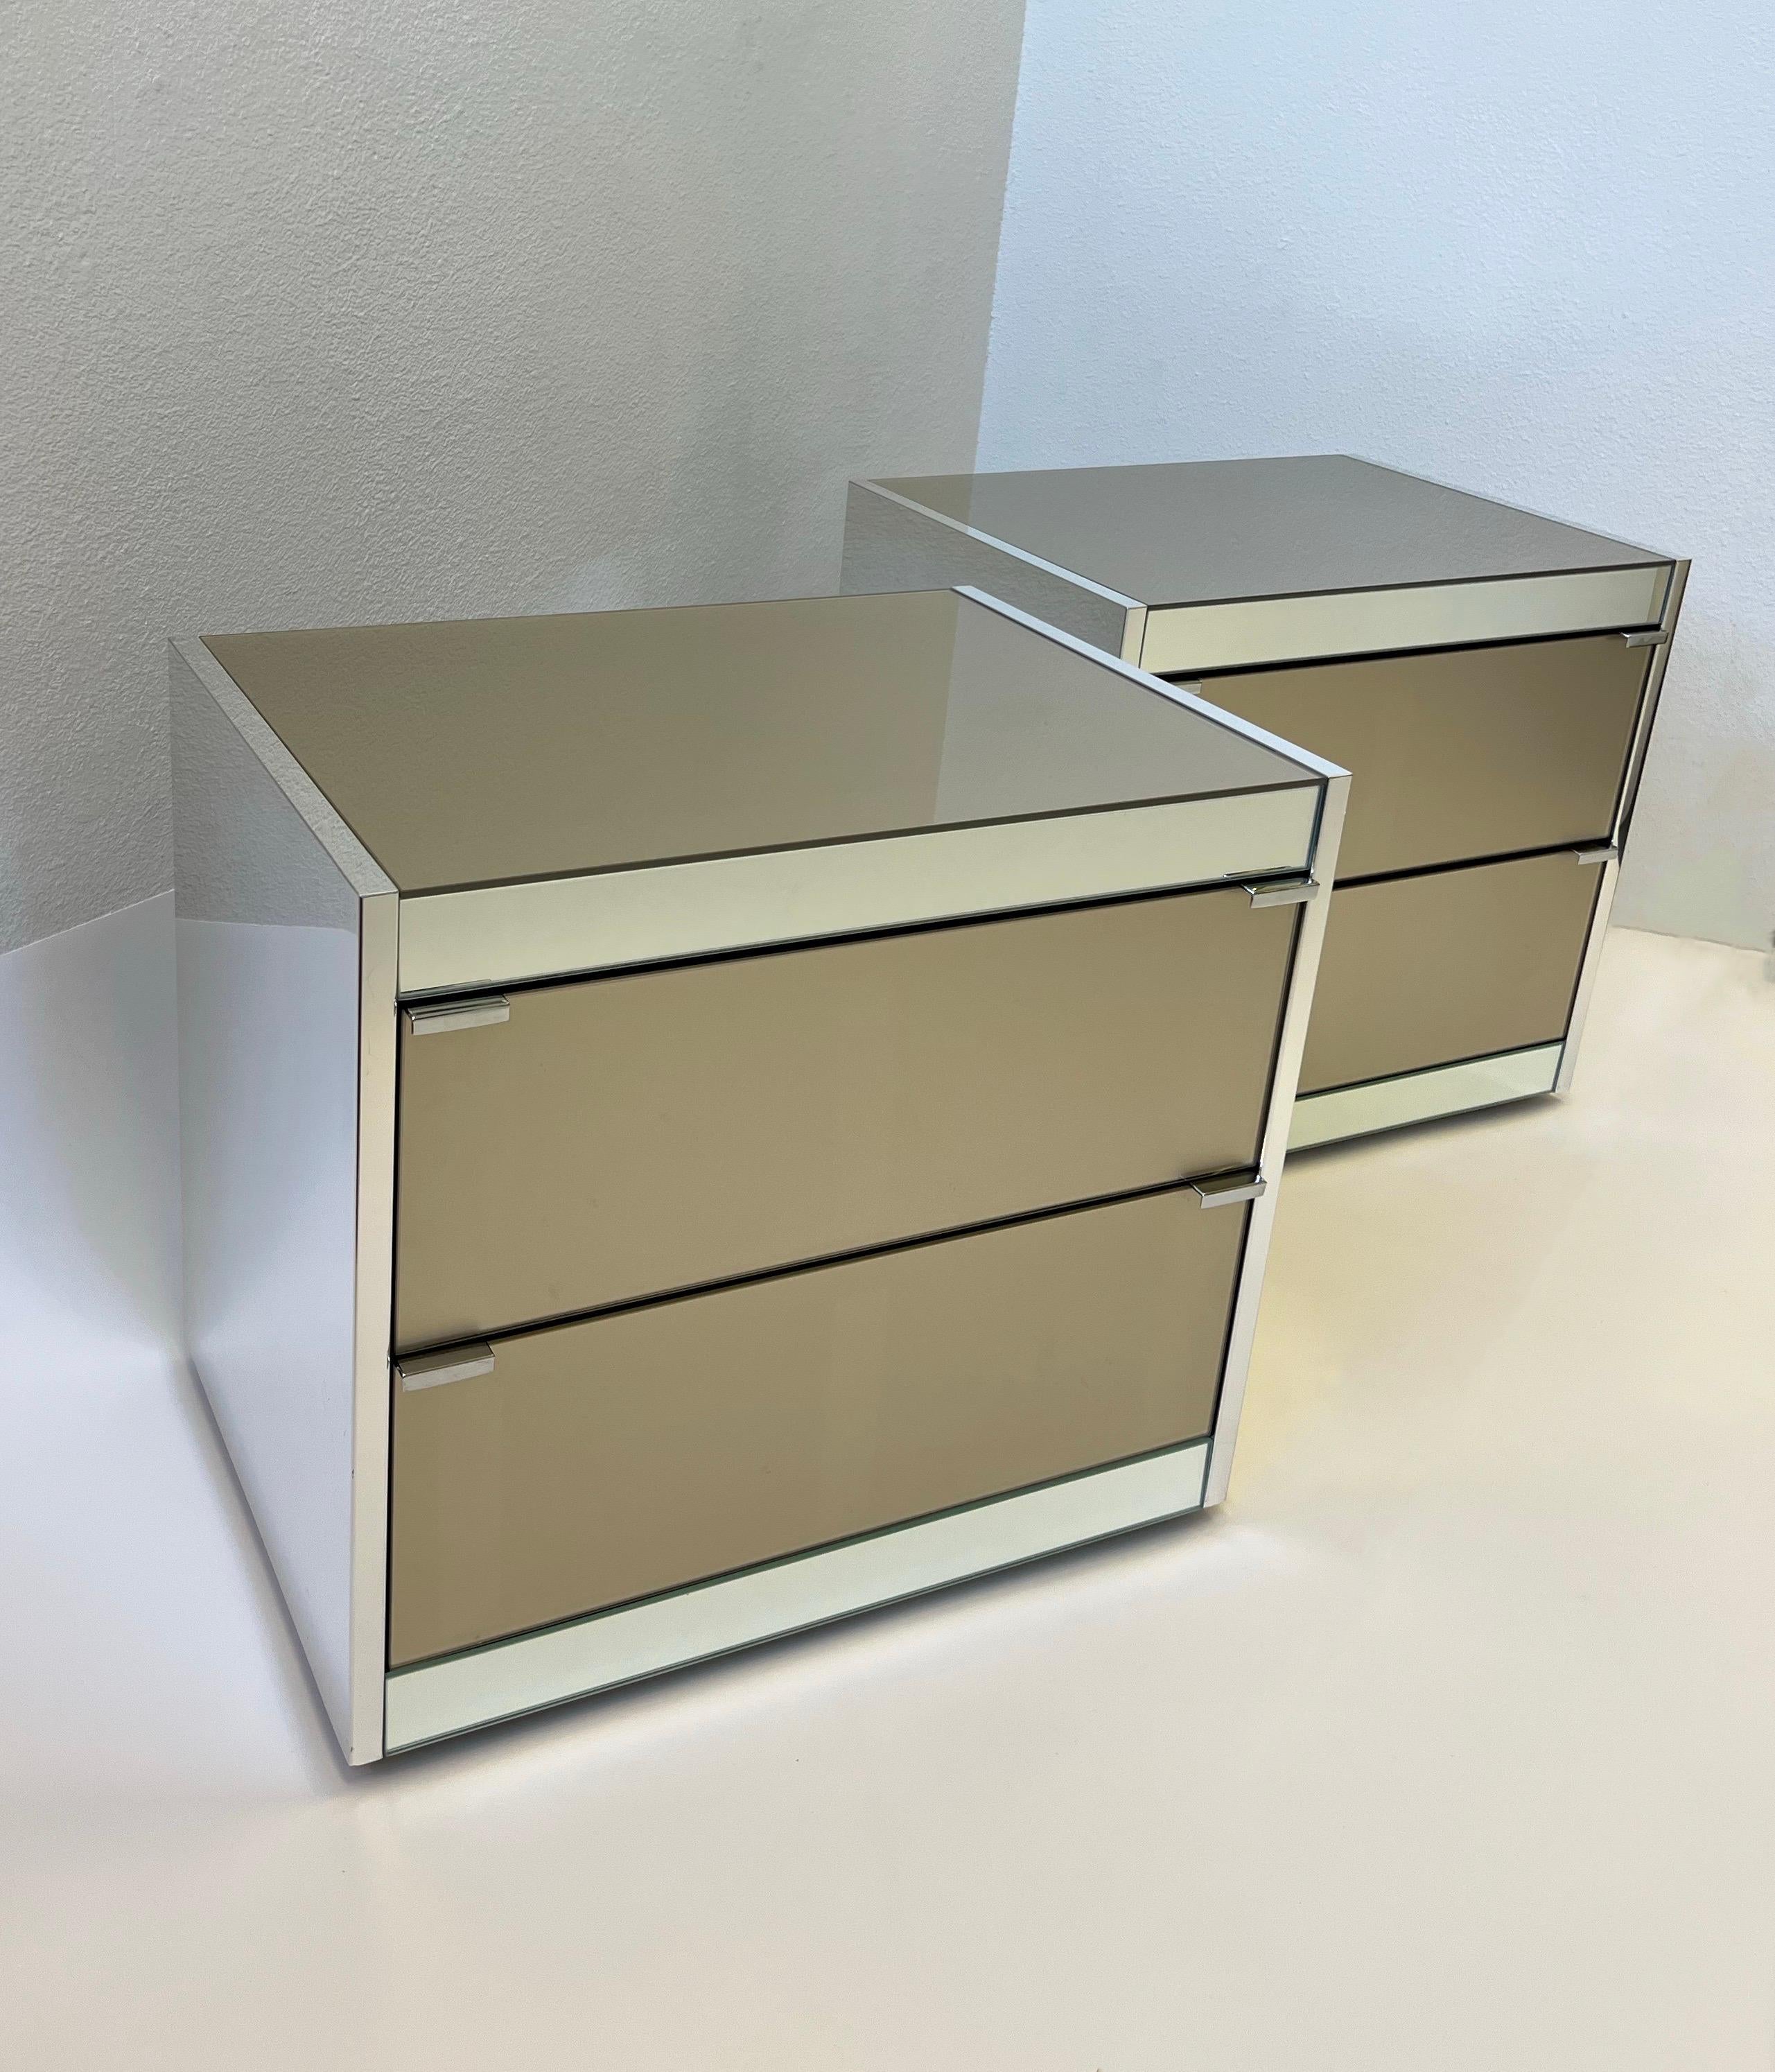 American Polish Aluminum and Mirror Pair of Nightstands by Ello